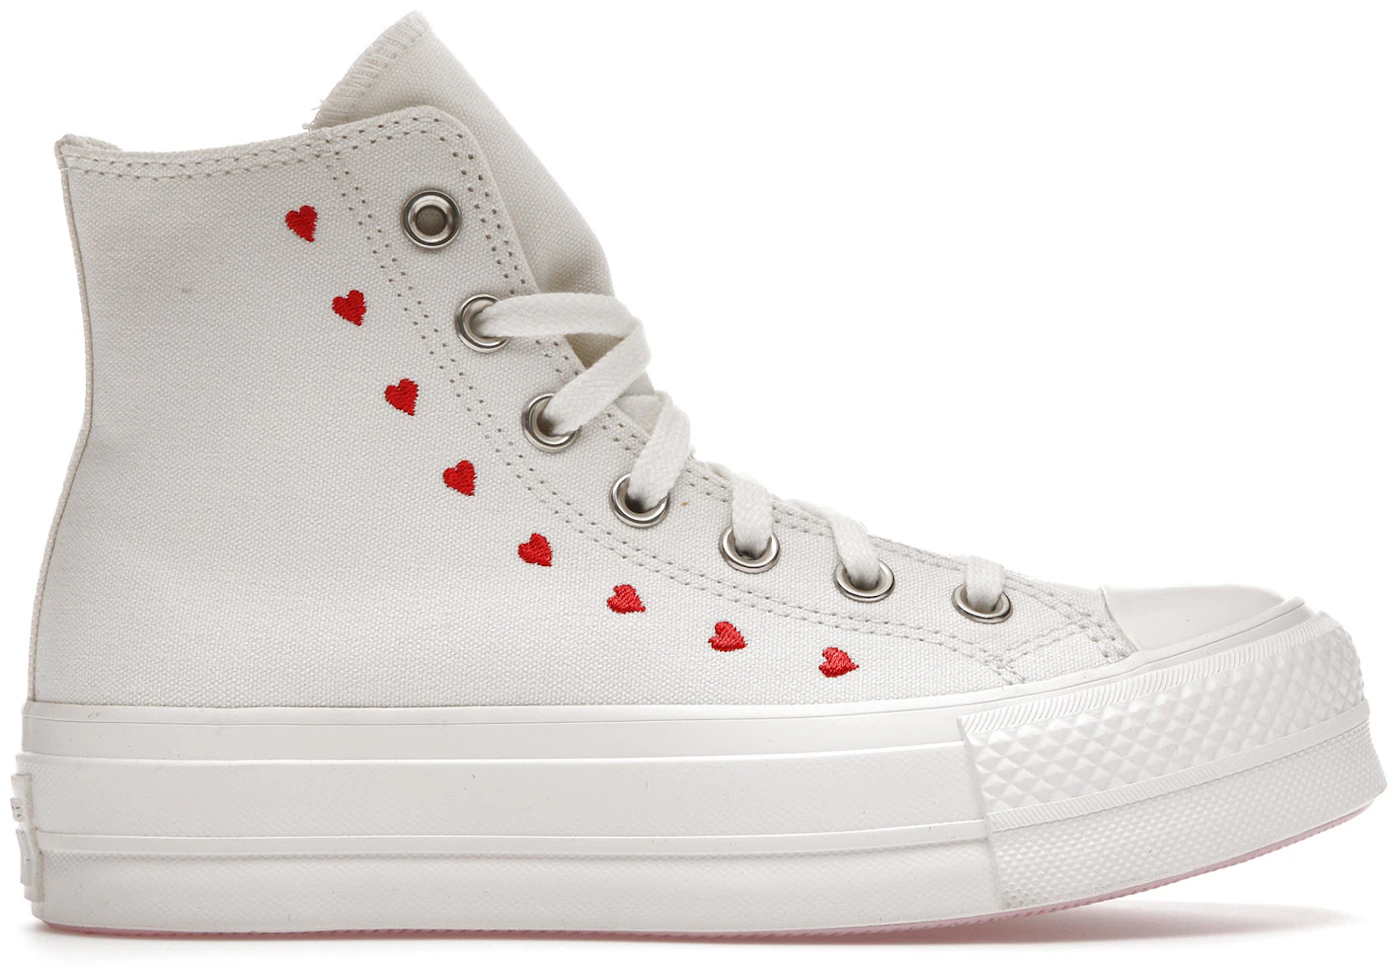 Converse Chuck Taylor All Star Lift Hi White Red (Women's) - A01599C - US